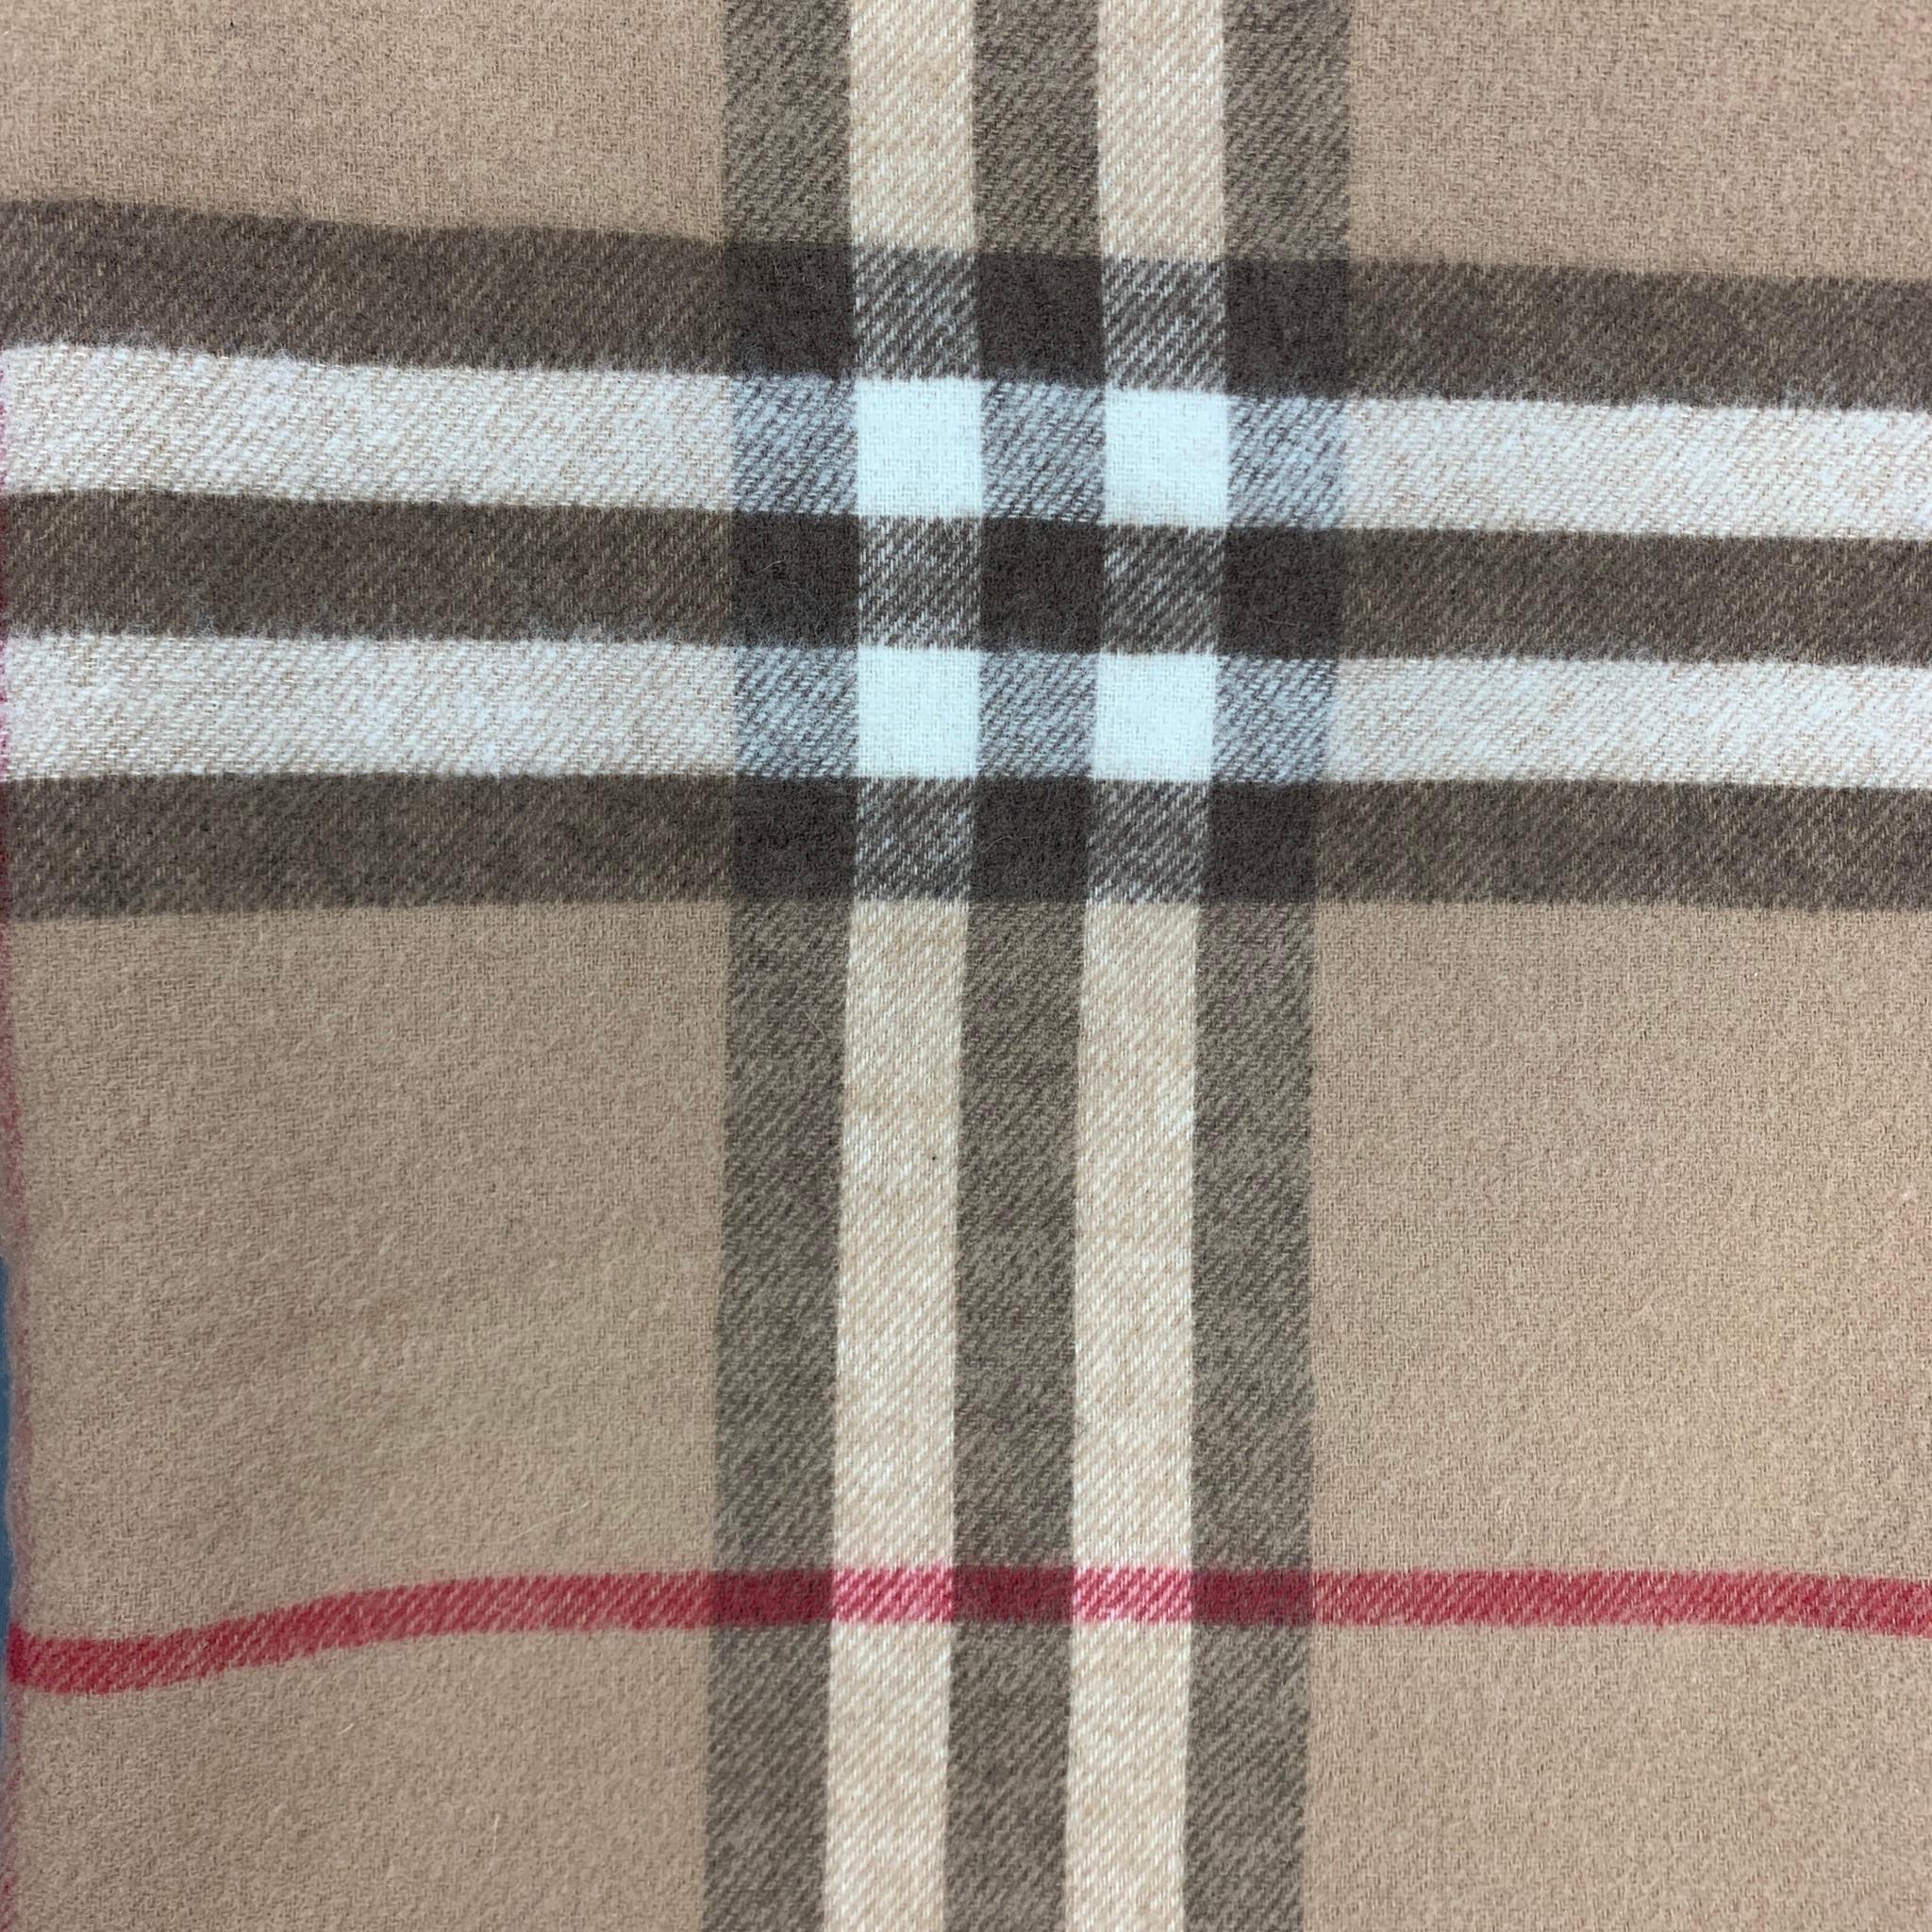 BURBERRY LONDON scarf comes in a tan & brown plaid merino wool / cashmere featuring a reversible style, patch pockets, and three inch trim. 

Very Good Pre-Owned Condition.

Measurements:

31 in. x 84 in. 